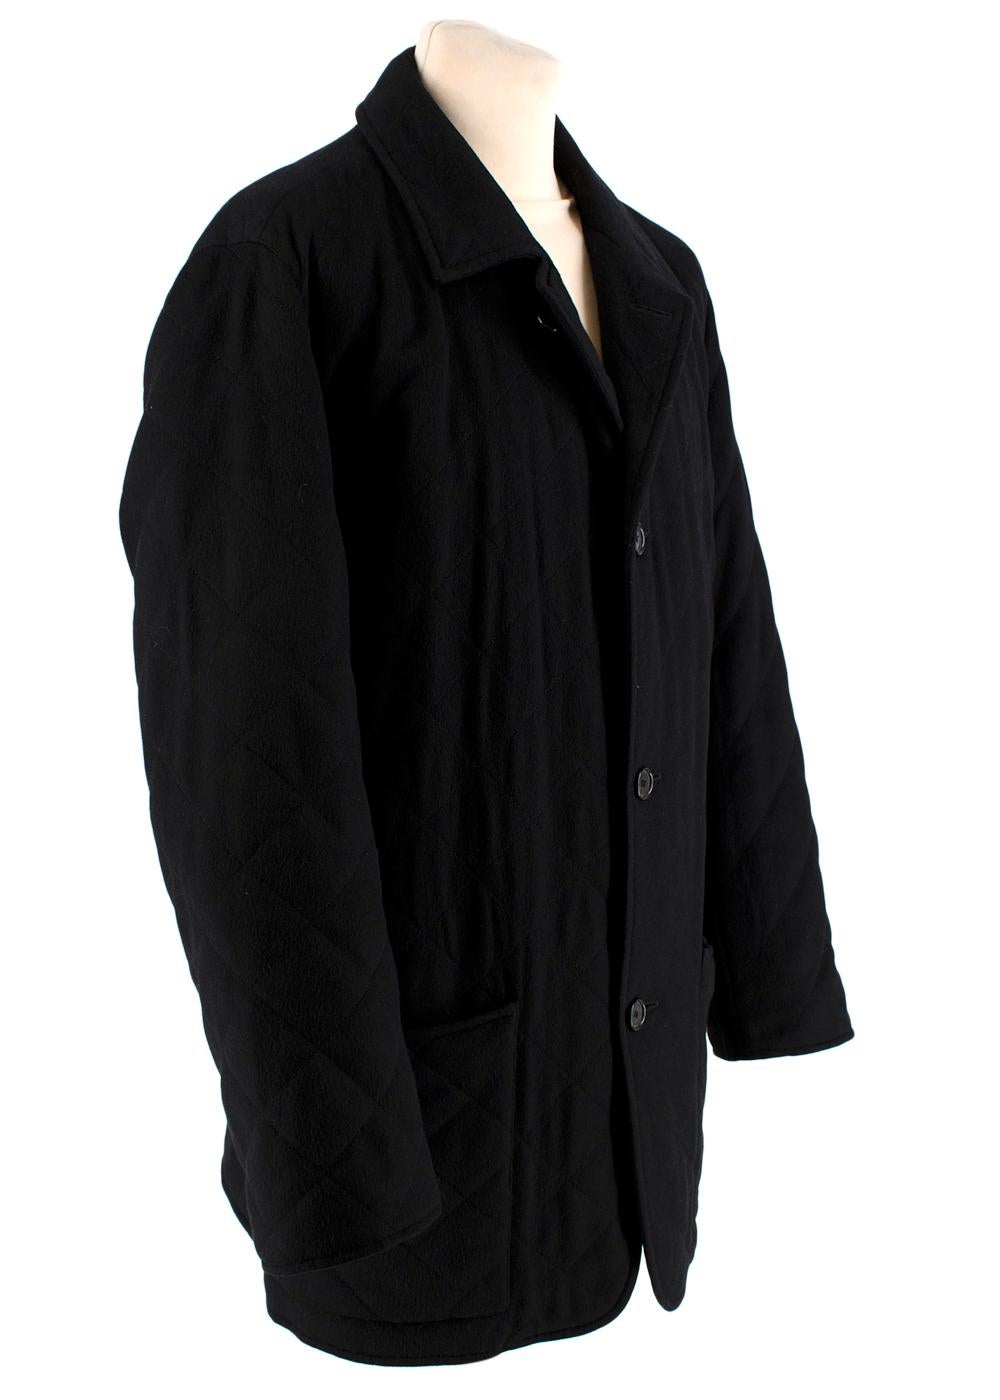 Agnona Black Cashmere Blend Coat


- Large side pockets
- Wide cuff
- Neat collar 
- Button fastening to the front 
- Inner pockets 
- Quilted texture
- Neutral black hue 
- Timeless versatile design 
 
Materials: 
There is no care label but we